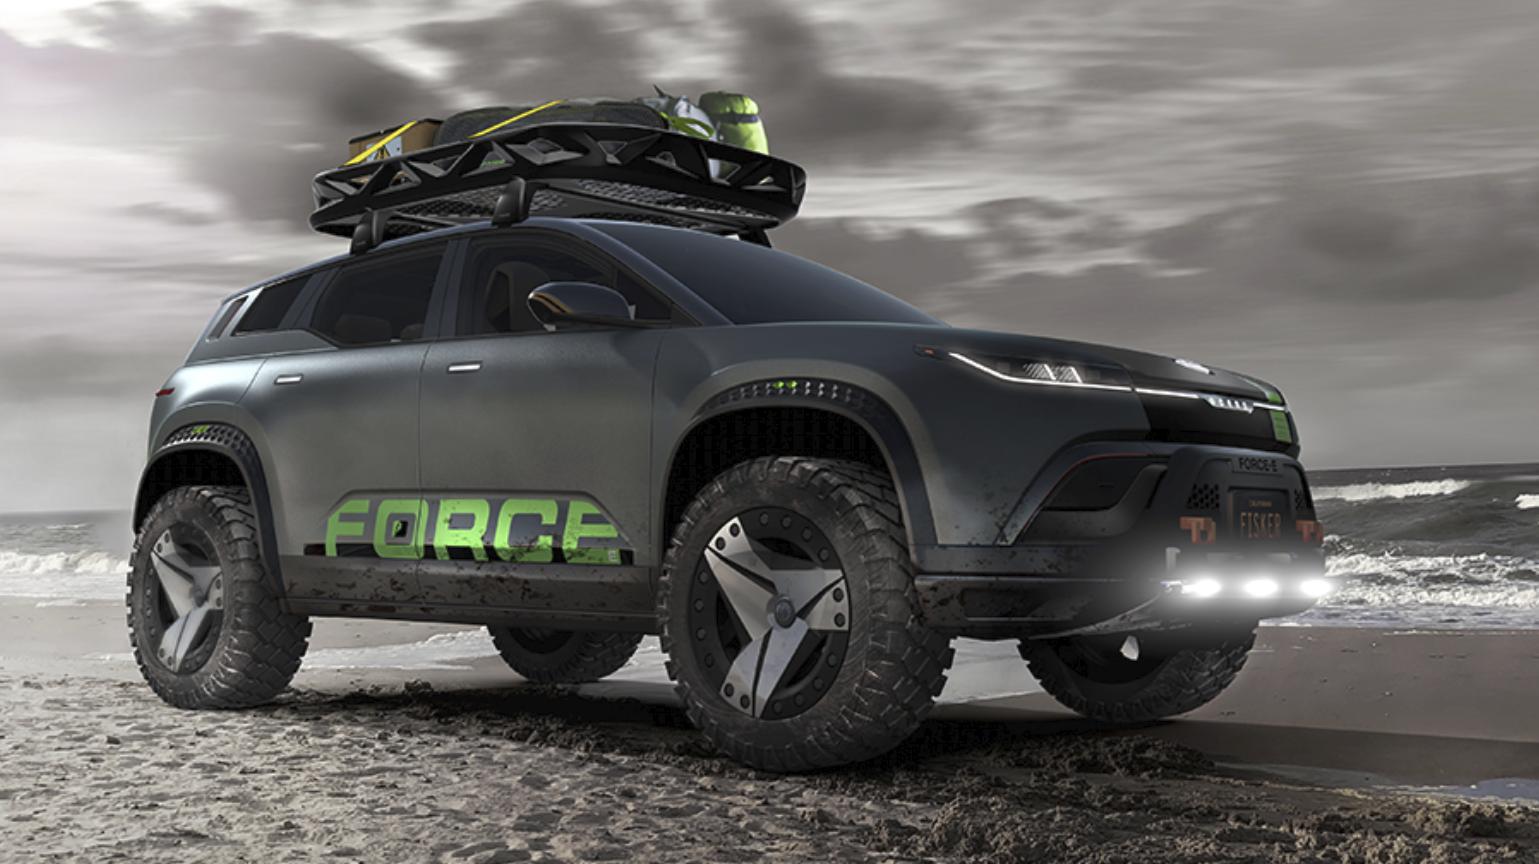 Fisker announces off-road-ready Force E package for Ocean, turning